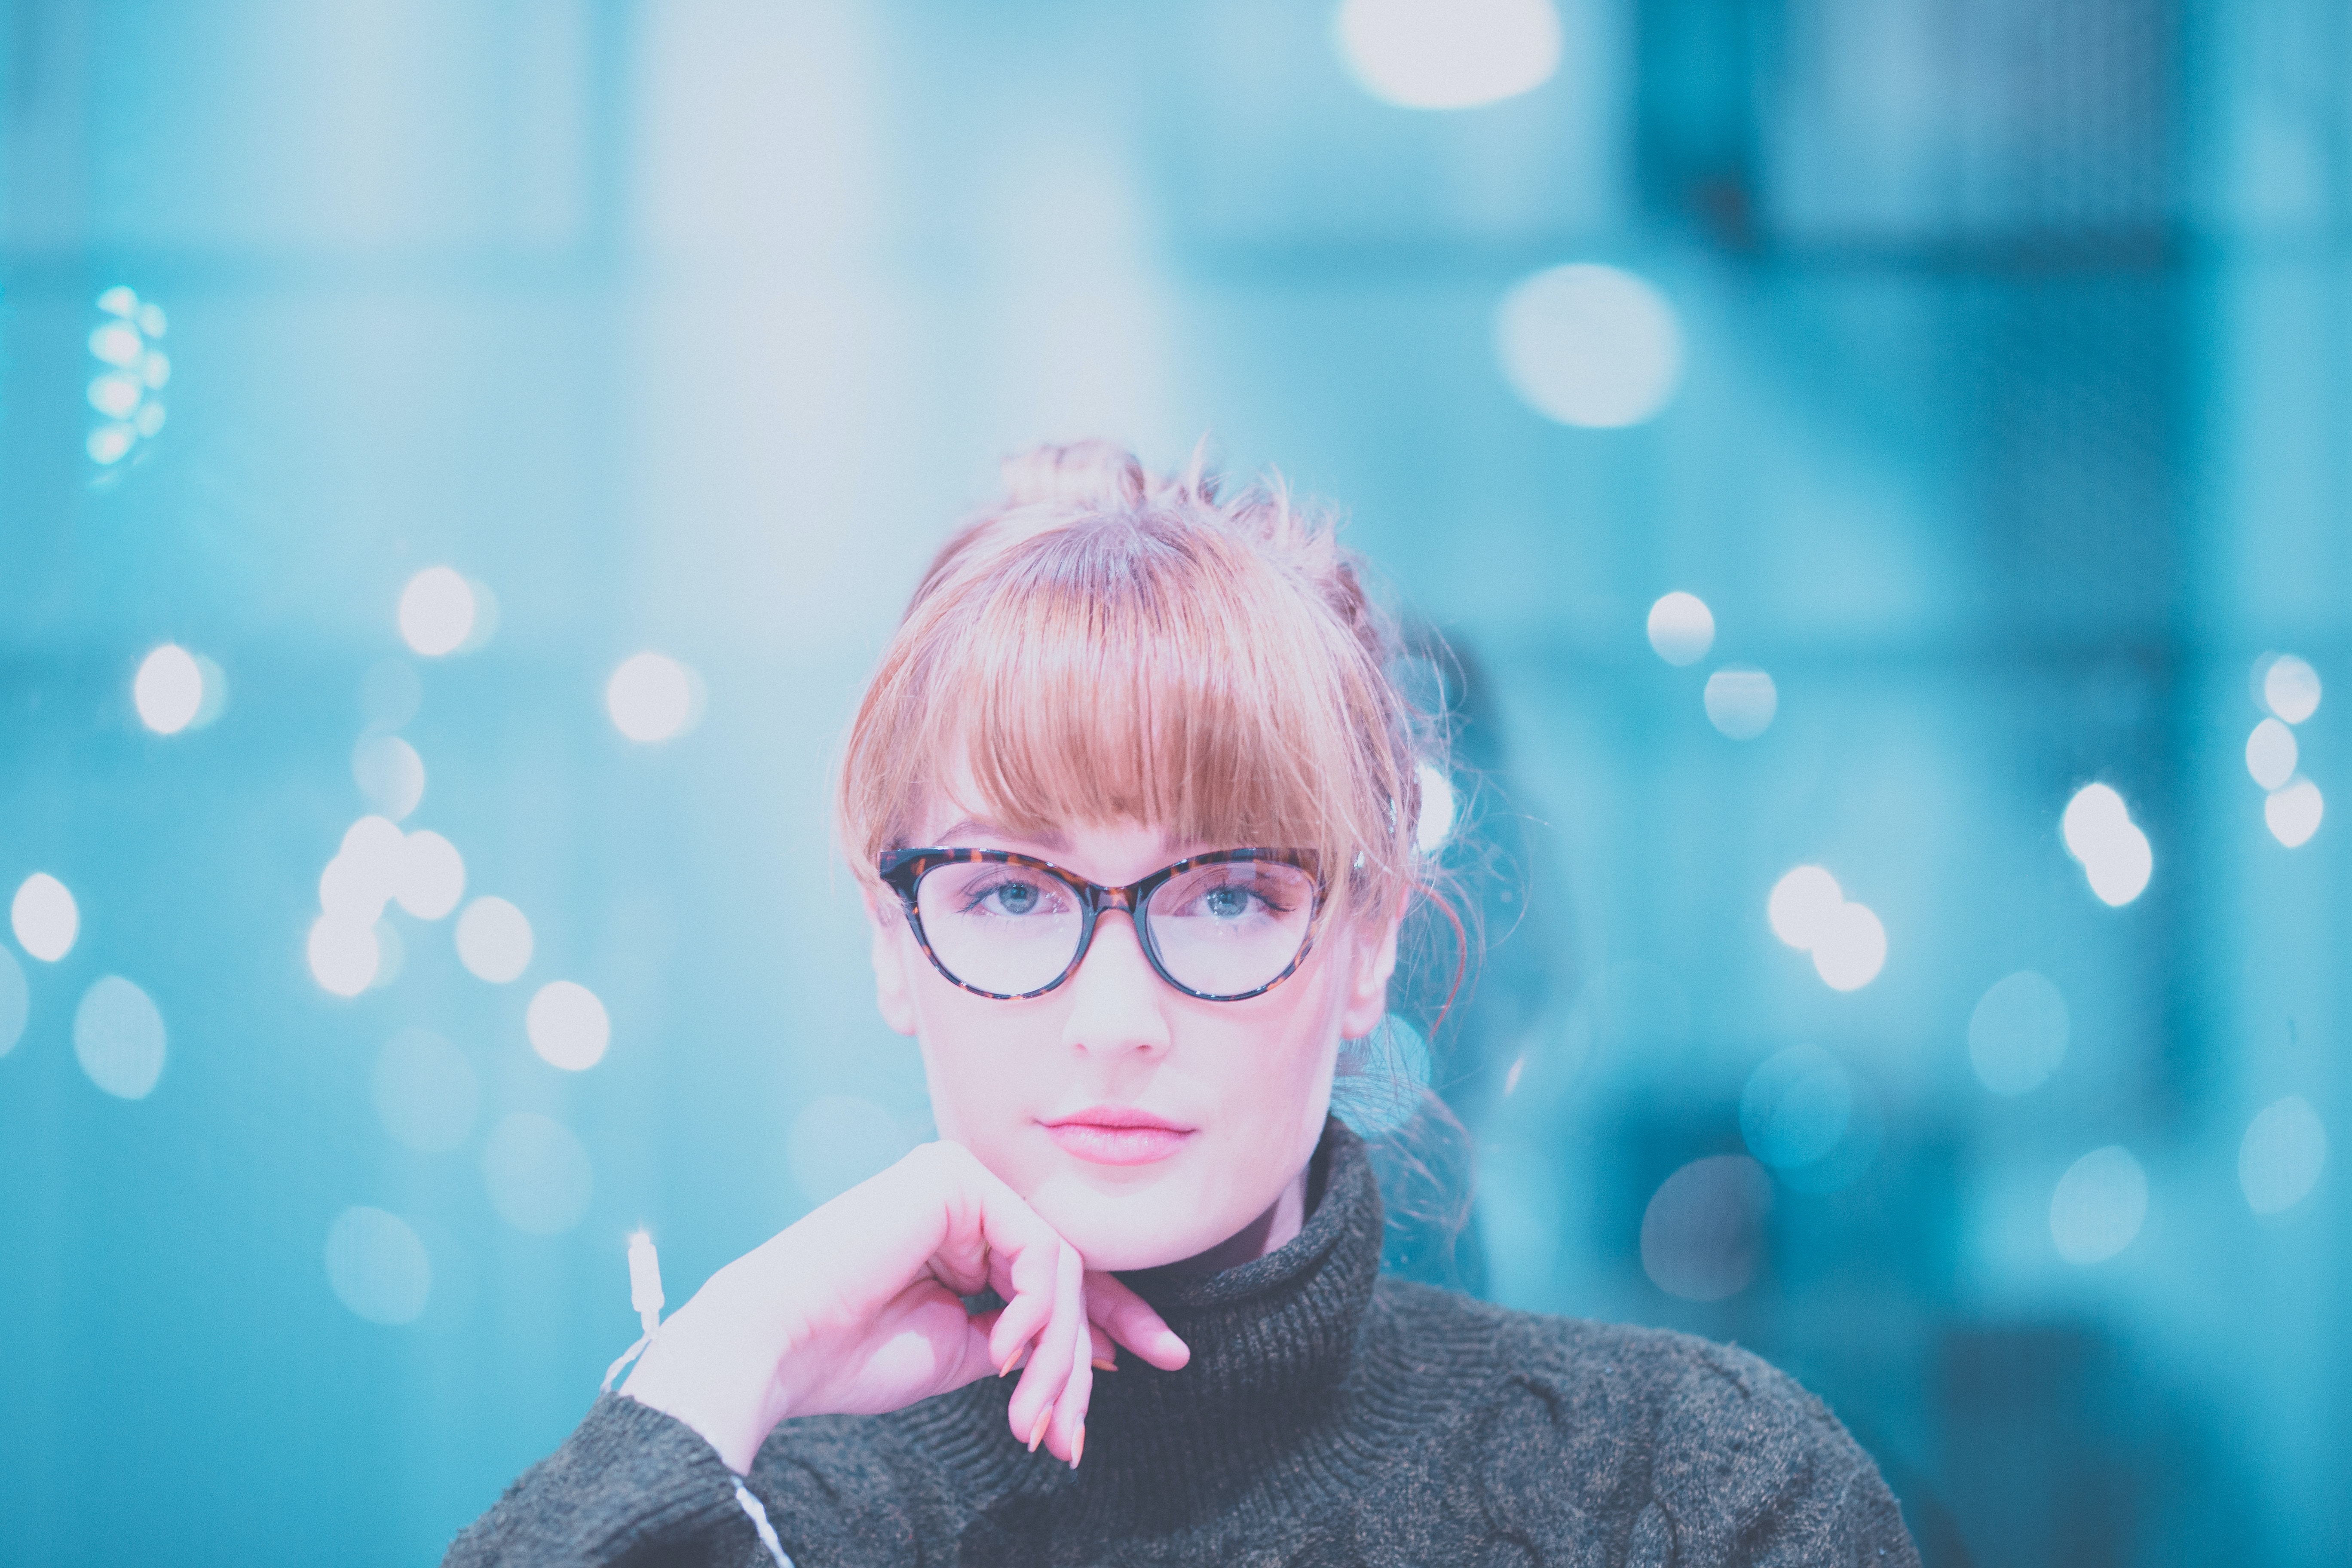 A woman with glasses. | Source: Unsplash